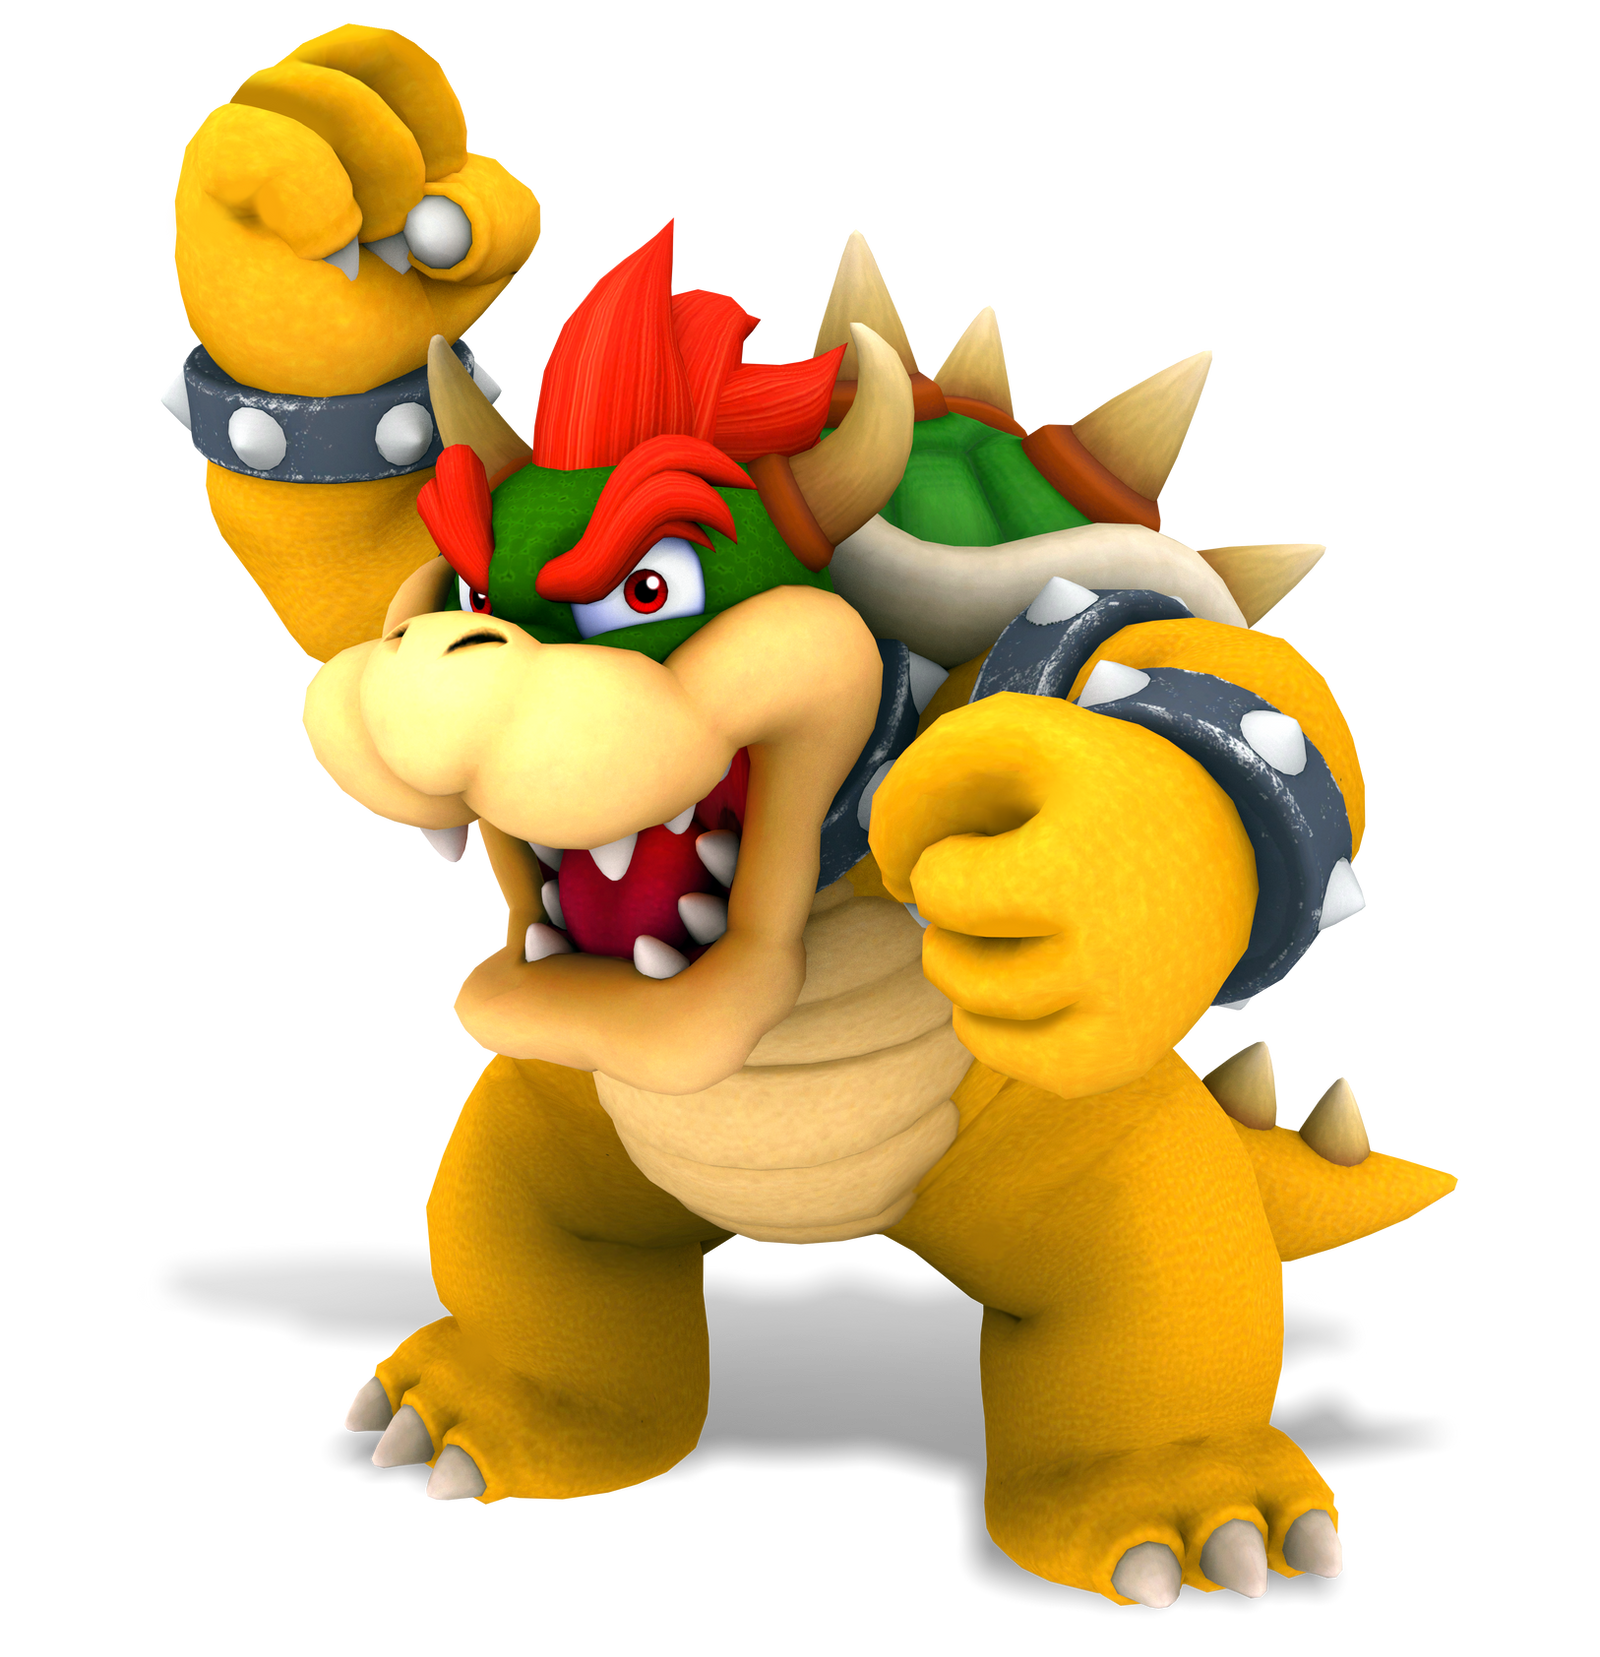 king_bowser_s_showtime__by_fawfulthegreat64-dc7ban1.png